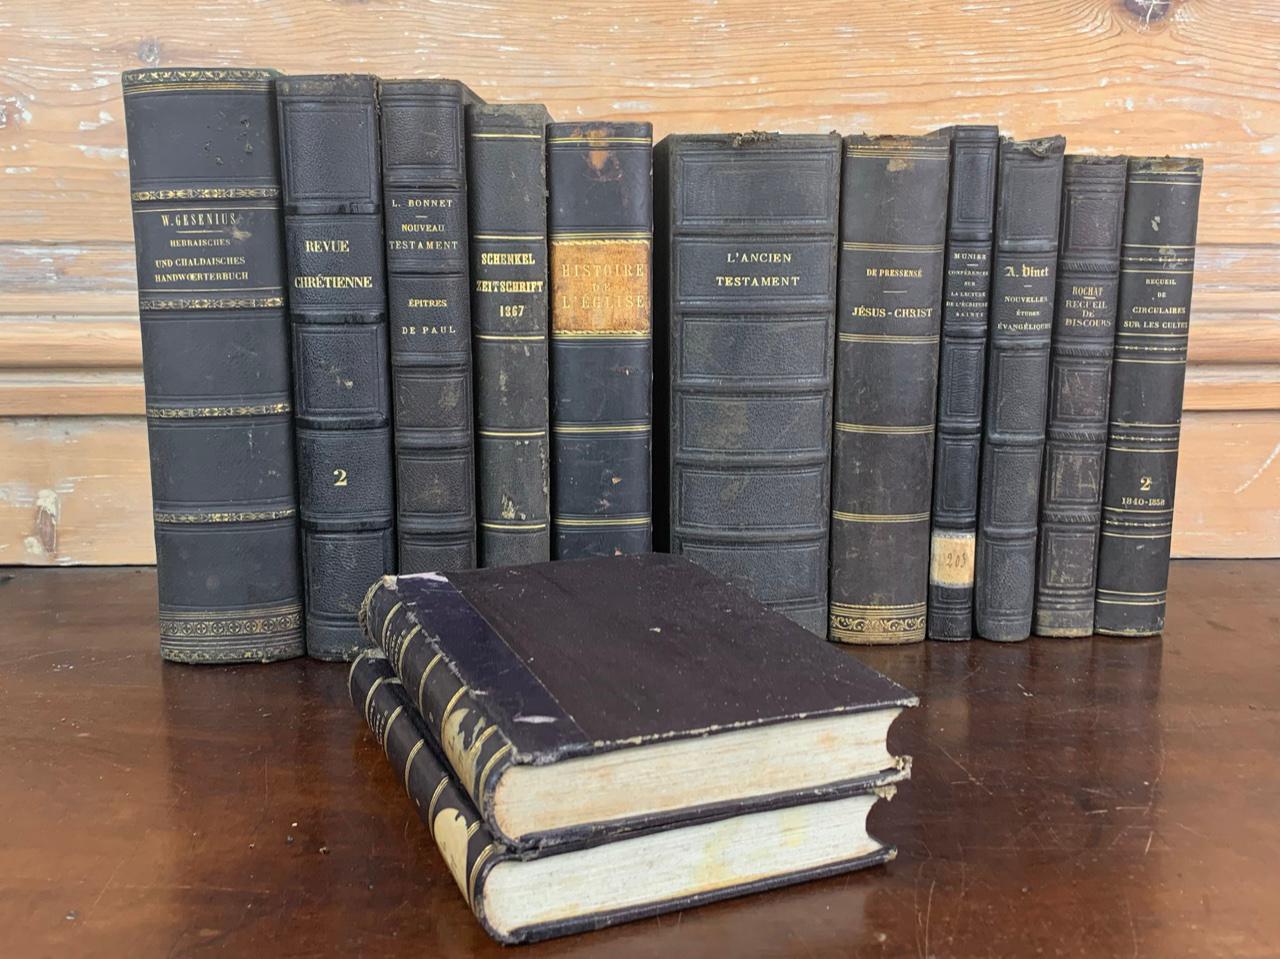 Set of old books dating from the 19th century. We have for example « Church Story’s » From an old protestant library near Le Havre in France. These beautiful books are perfect to fill a nice library. Sizes may vary.